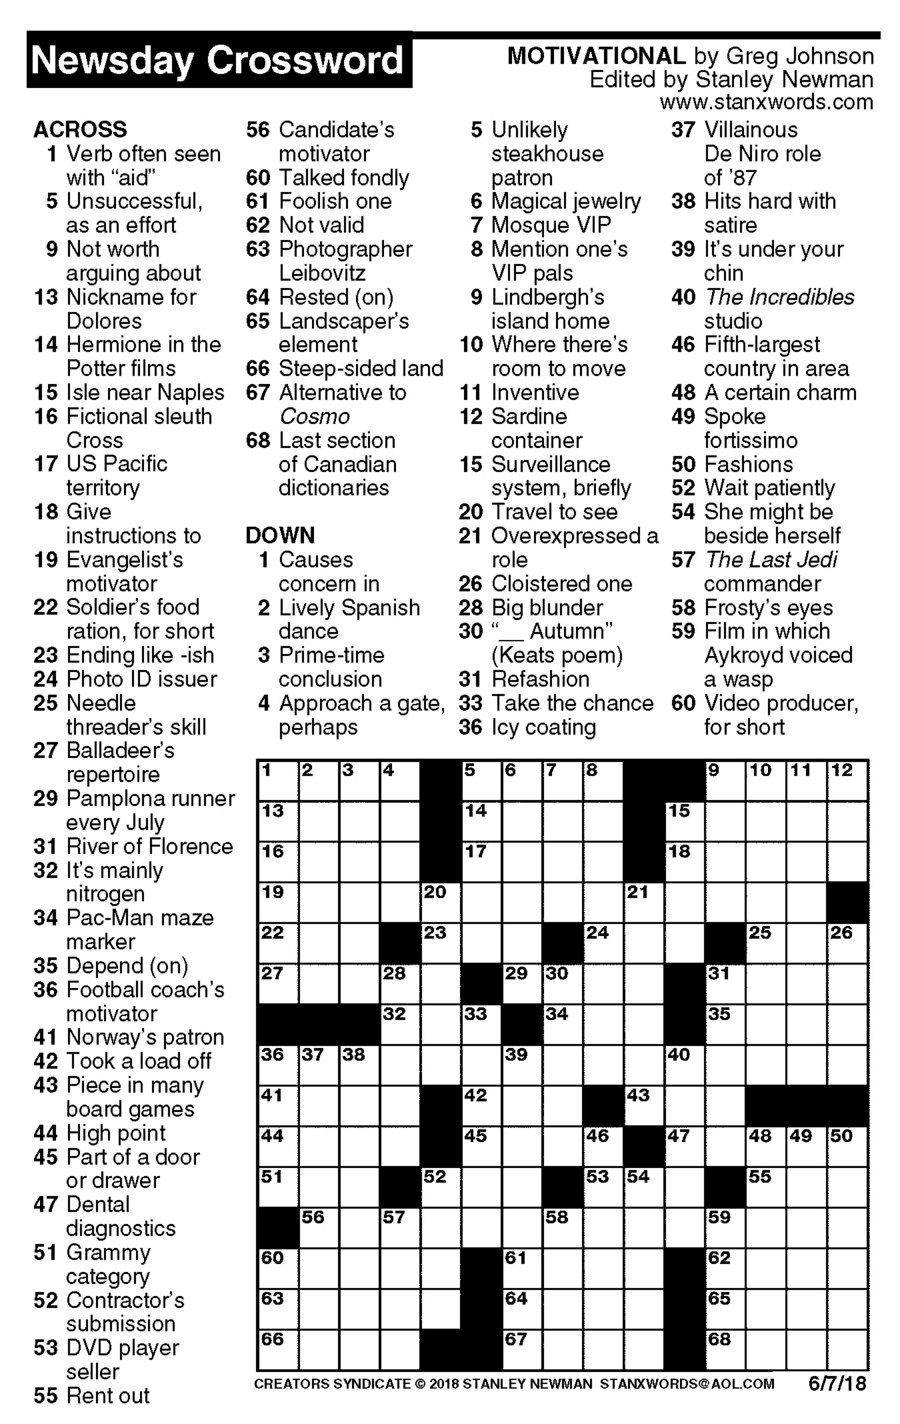 Newsday Crossword Puzzle For Jun 07, 2018,stanley Newman